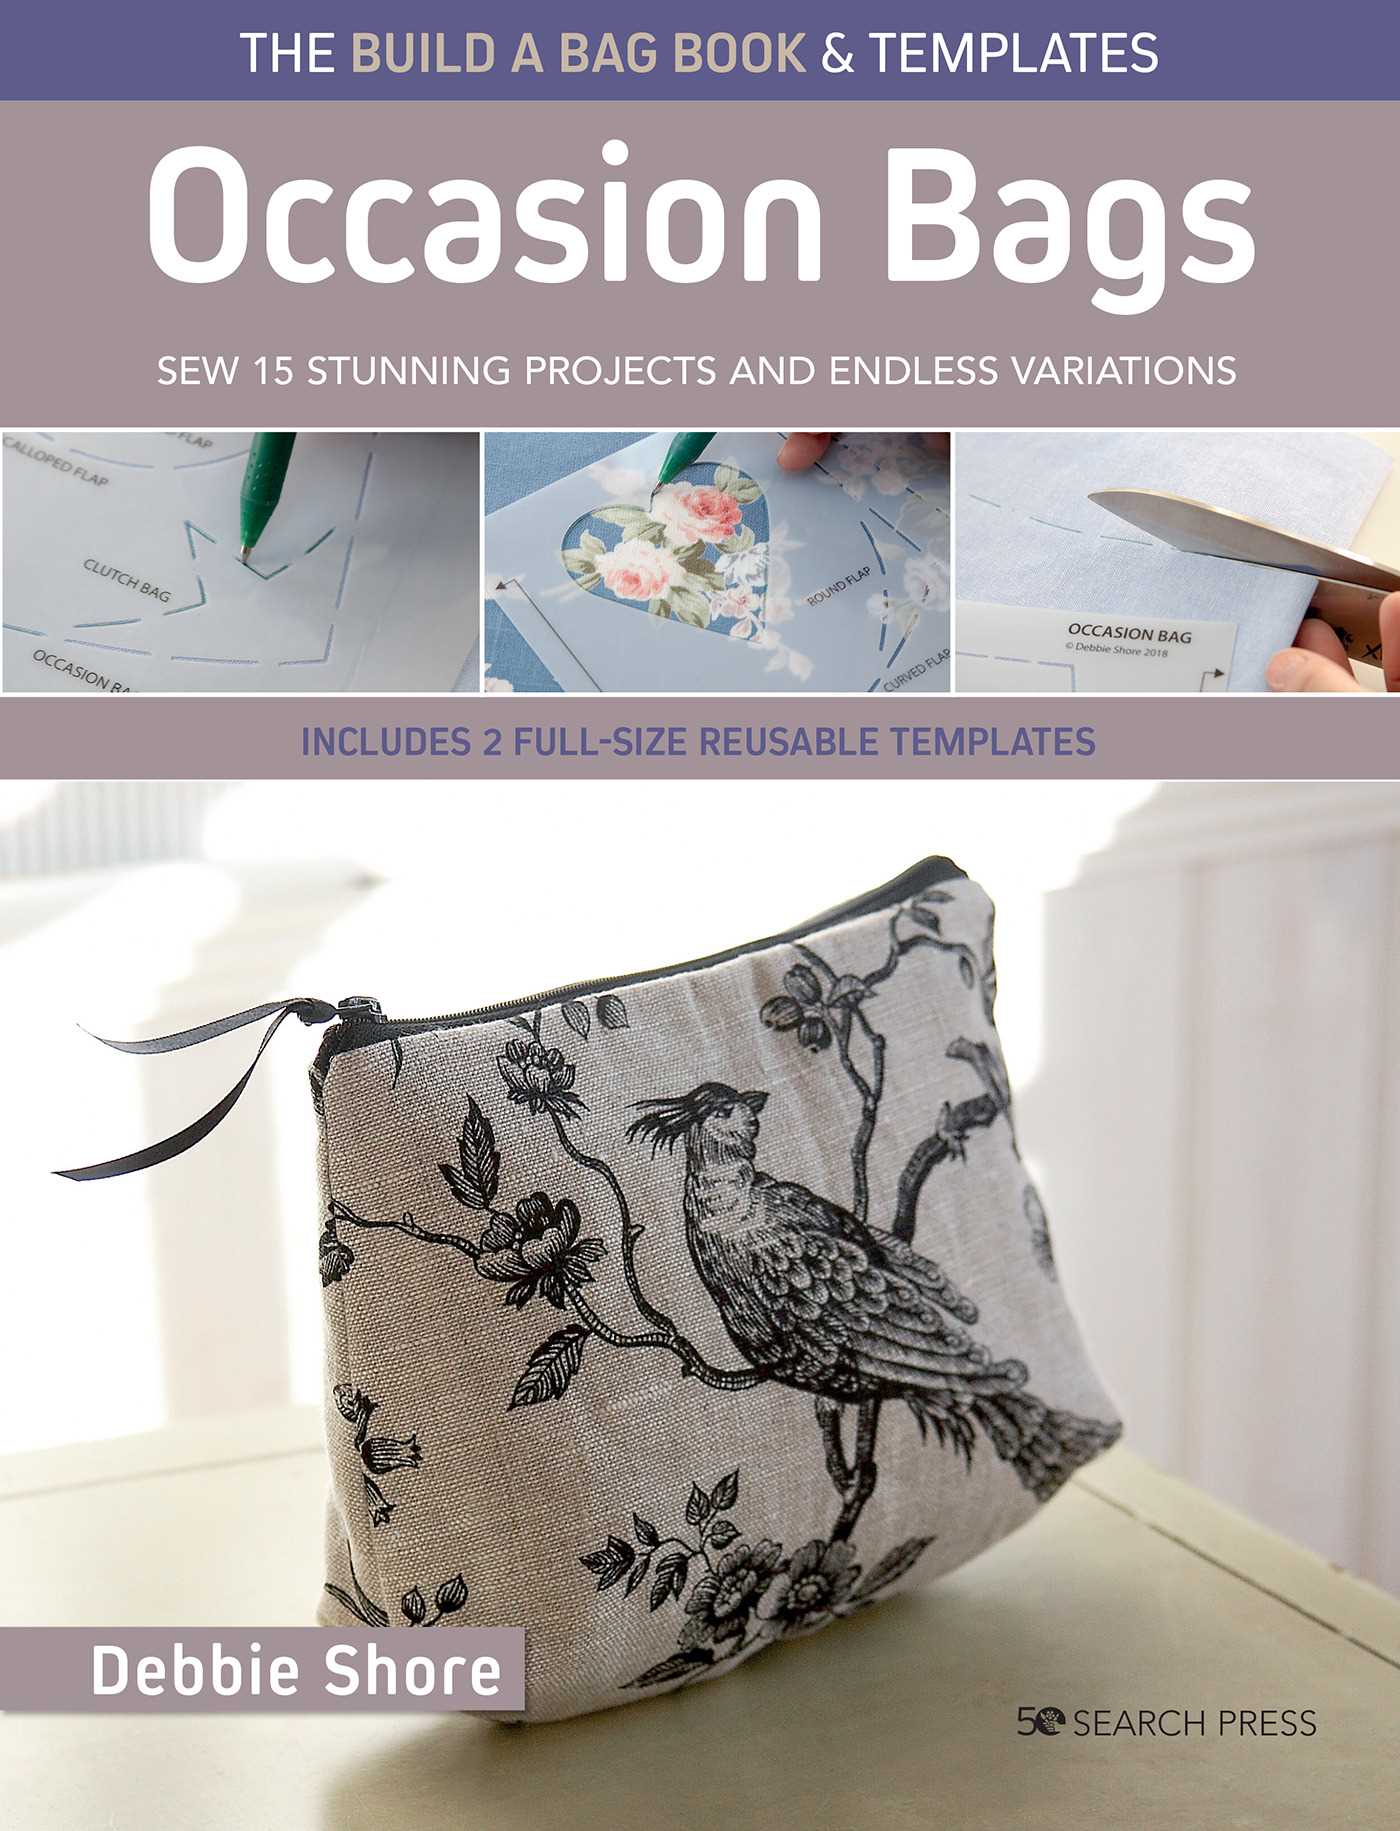 Occasion Bags (The Build a Bag Book)